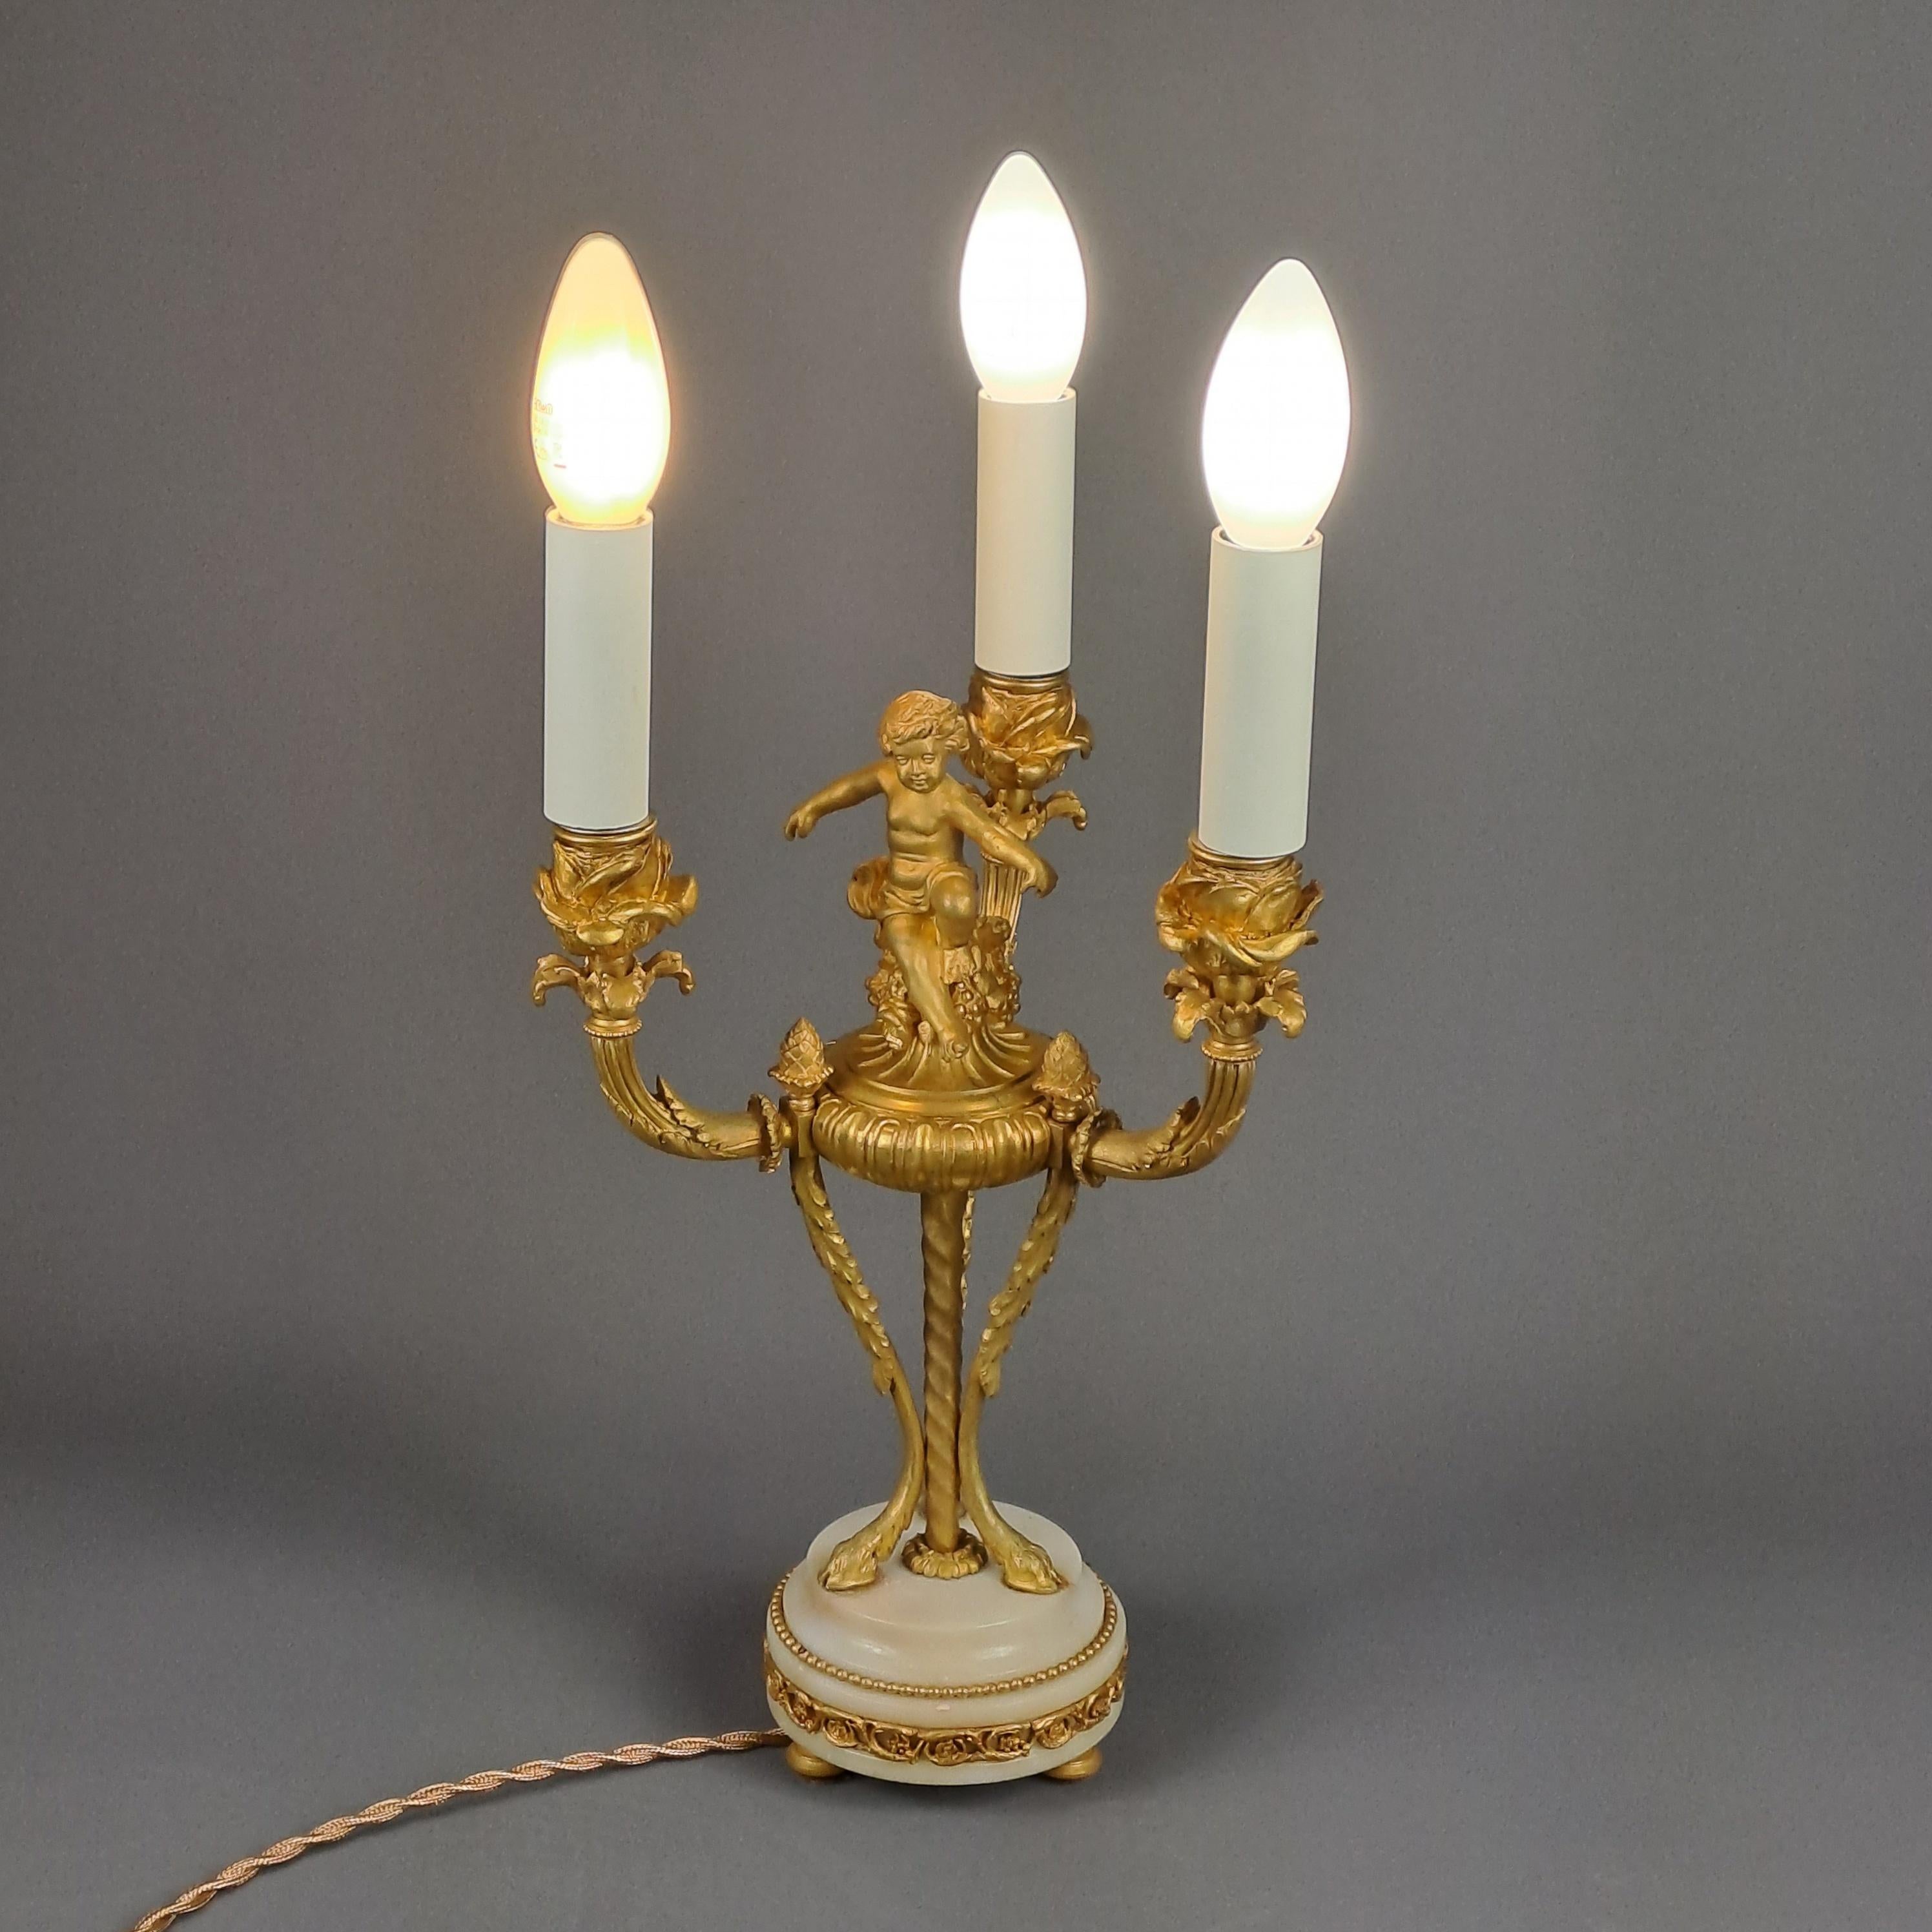 Candlestick with three Louis XVI Style sconces in gilded bronze and white marble base.

Mounted as a desk or mantel lamp, it has a very beautiful finely chiseled decoration with in particular a putto in the center balanced on a floral and vegetal